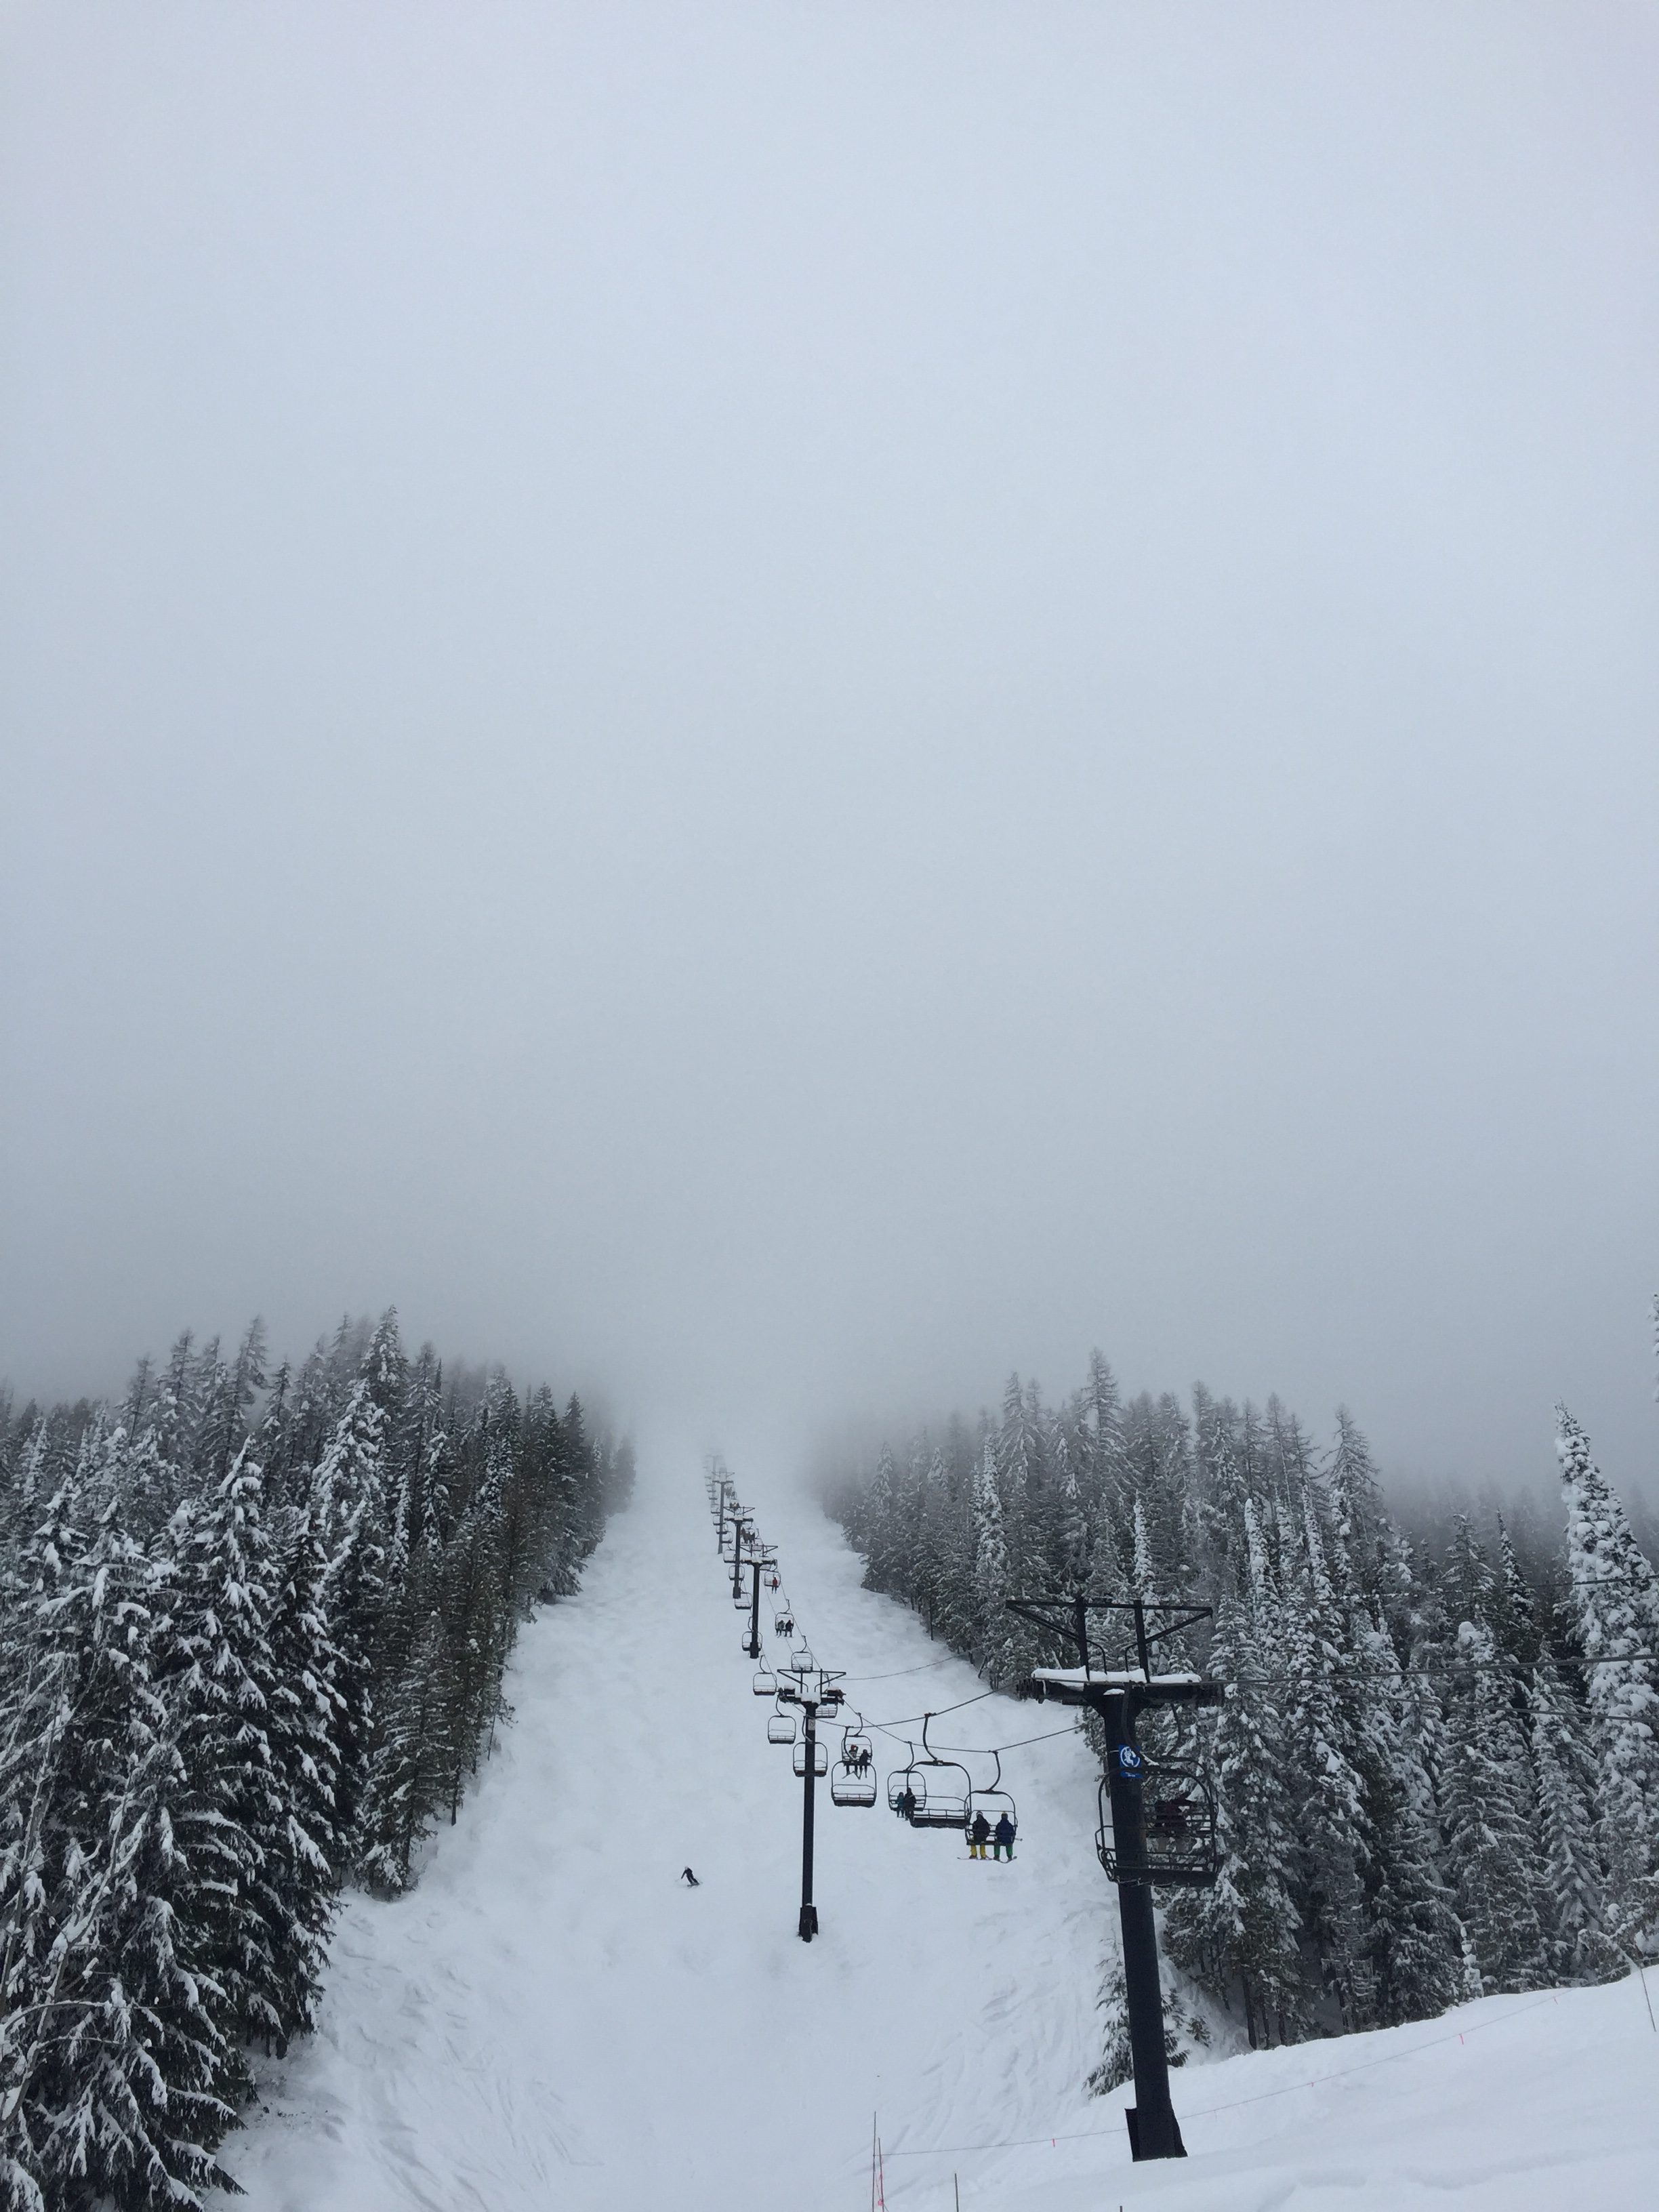 Out of the clouds and under the Motherlode chair. Hard to see but the snow quality was superb.